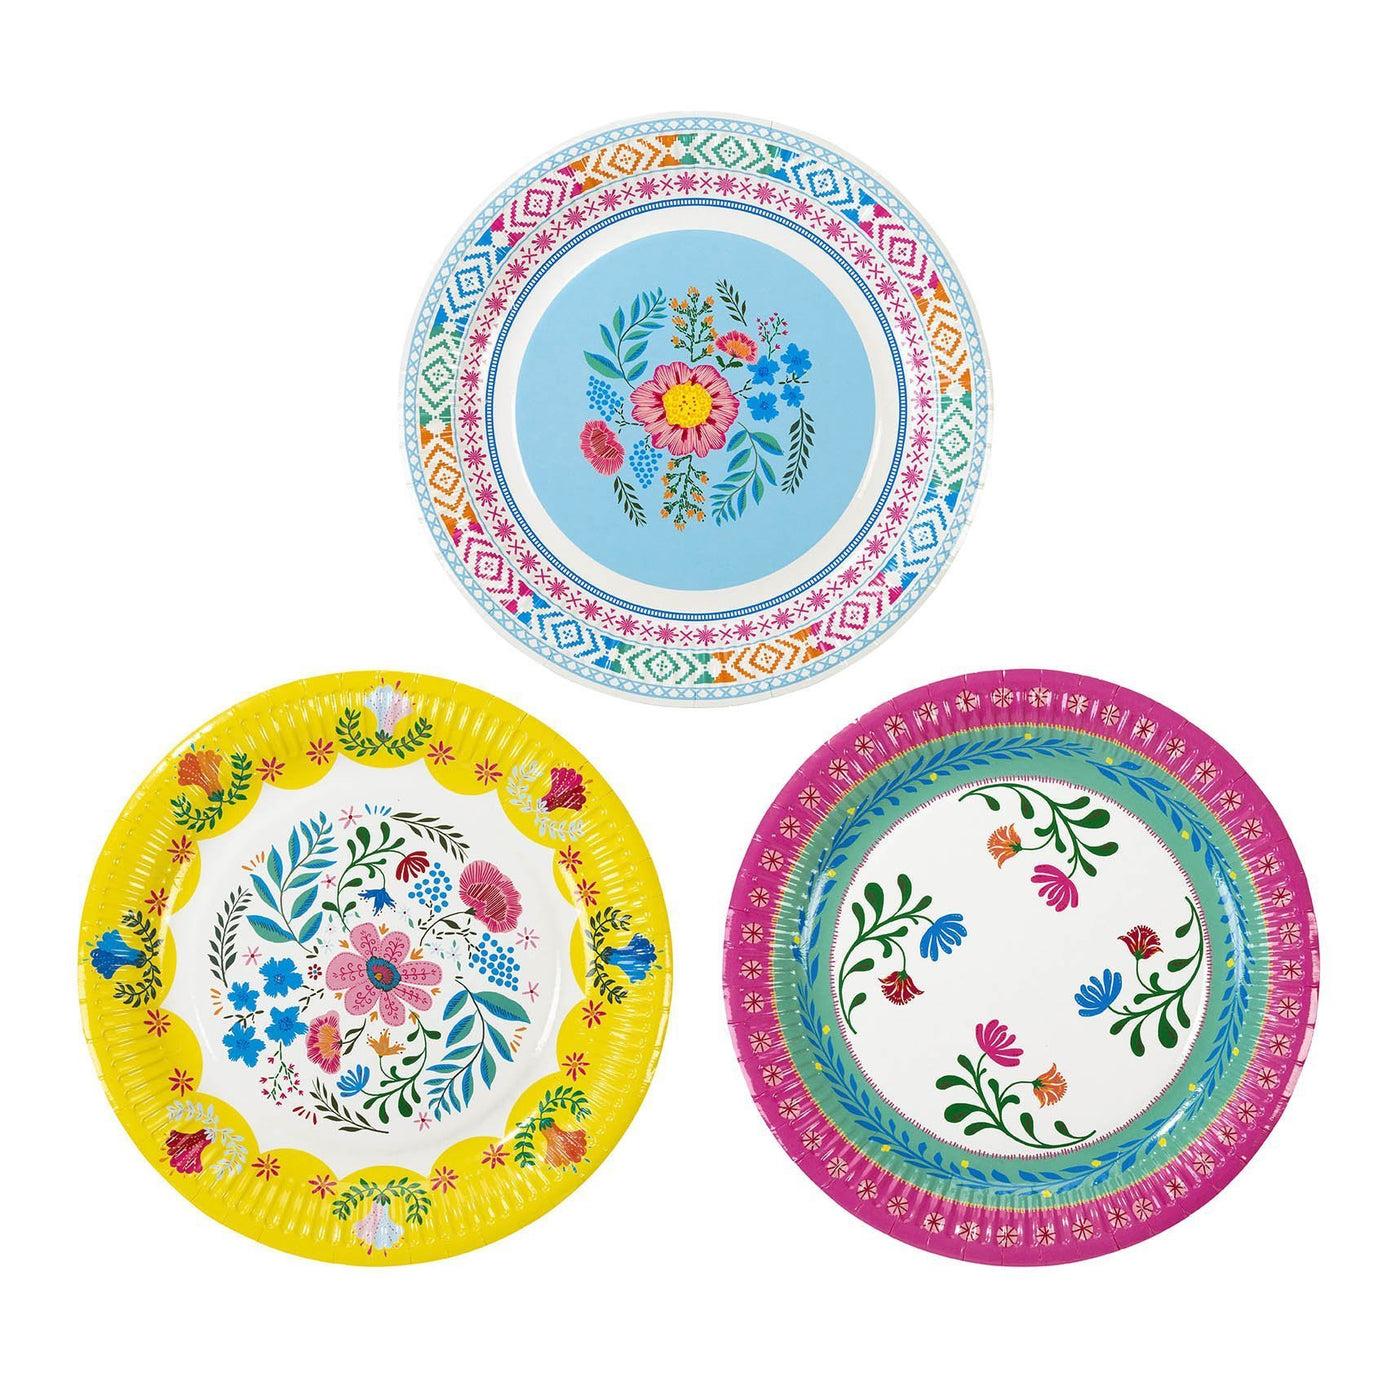 Top view of the 3 different designs included with our floral paper plates. All designs feature colorful illustrations of flowers and foliage. All three variants have a either a yellow border, a magenta border, or a multicolor border